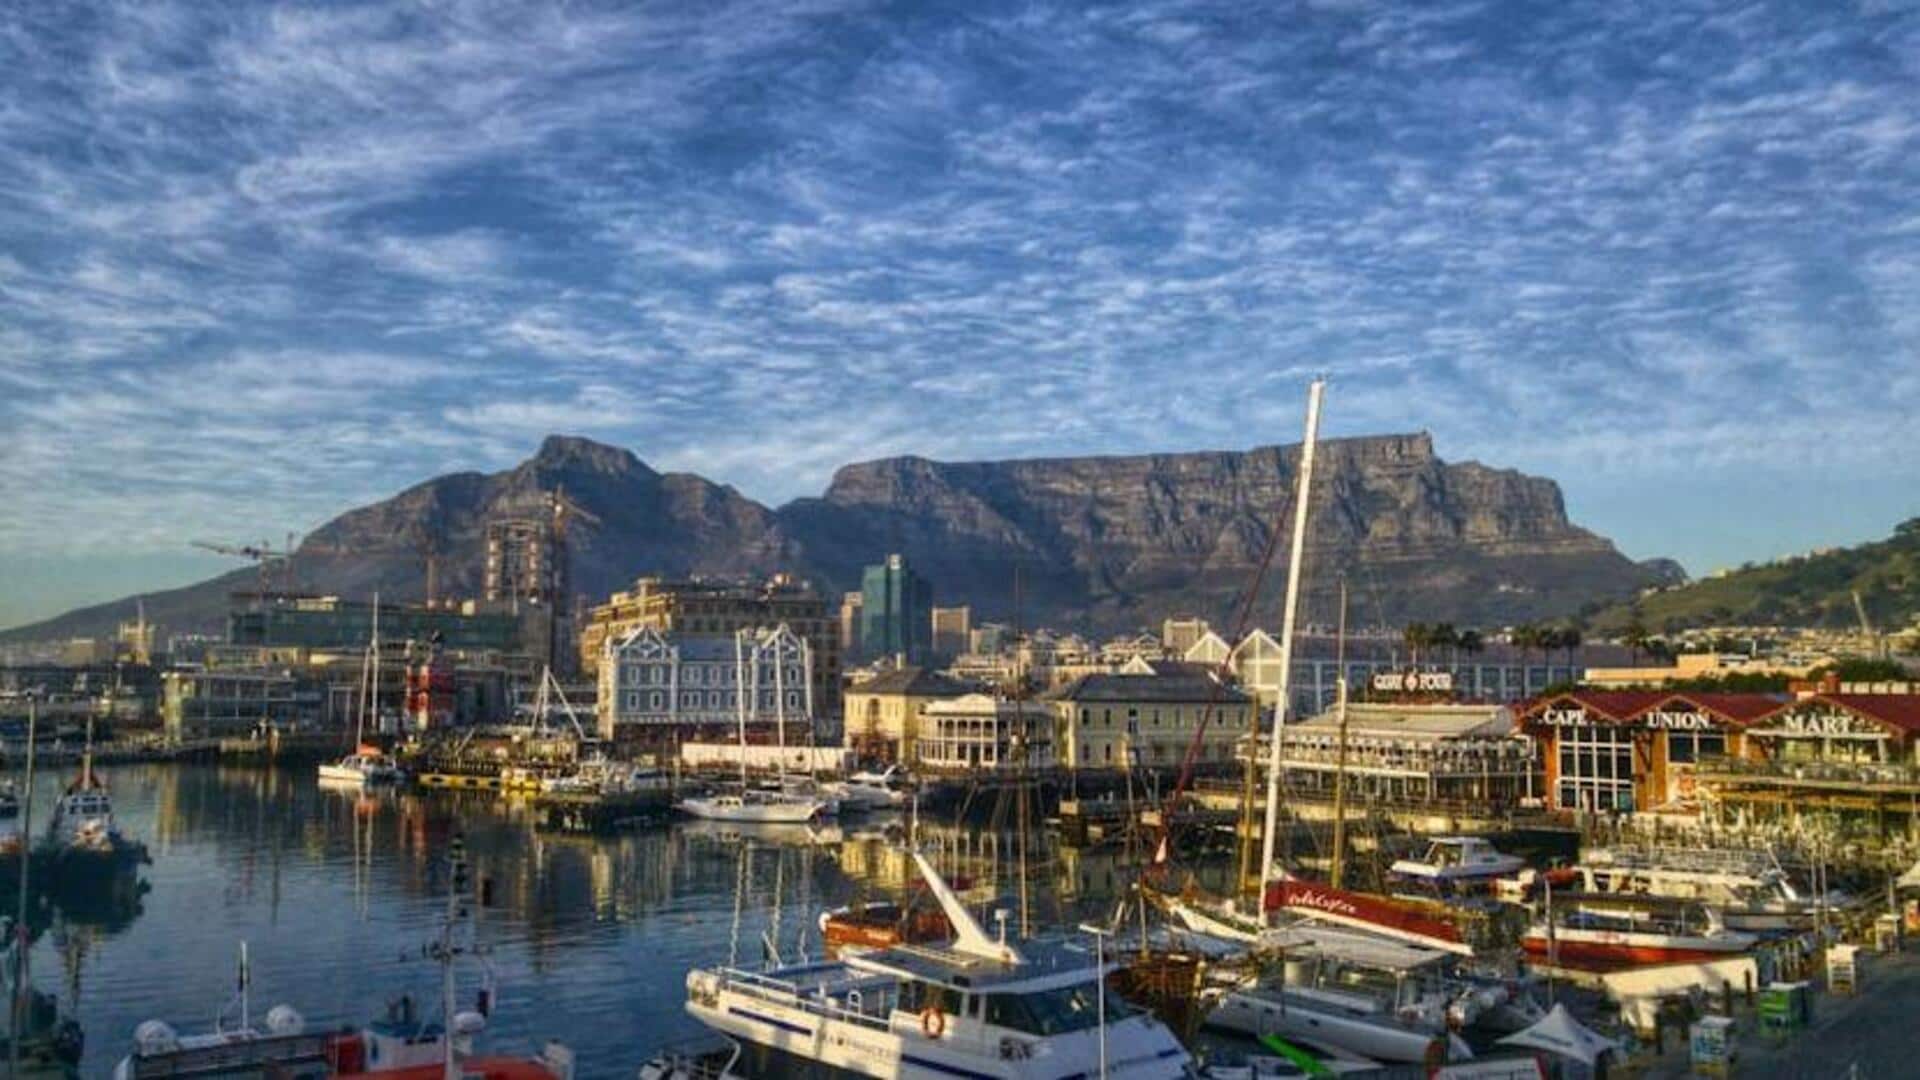 Discover Cape Town's coastal charms with this travel guide